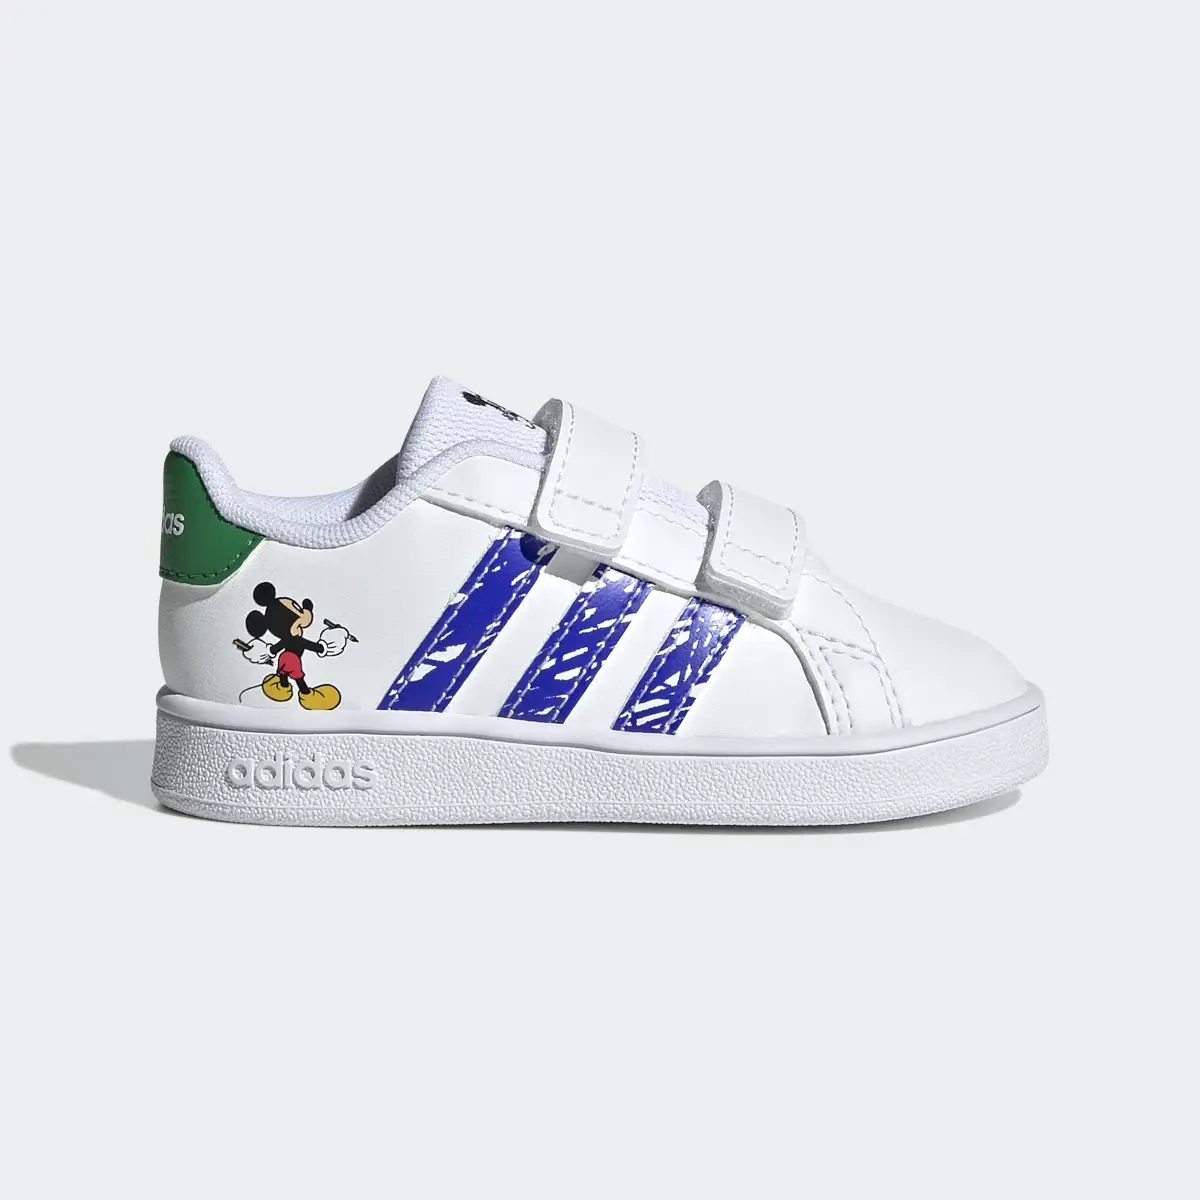 Adidas x Disney Minnie Mouse Grand Court Shoes. 2